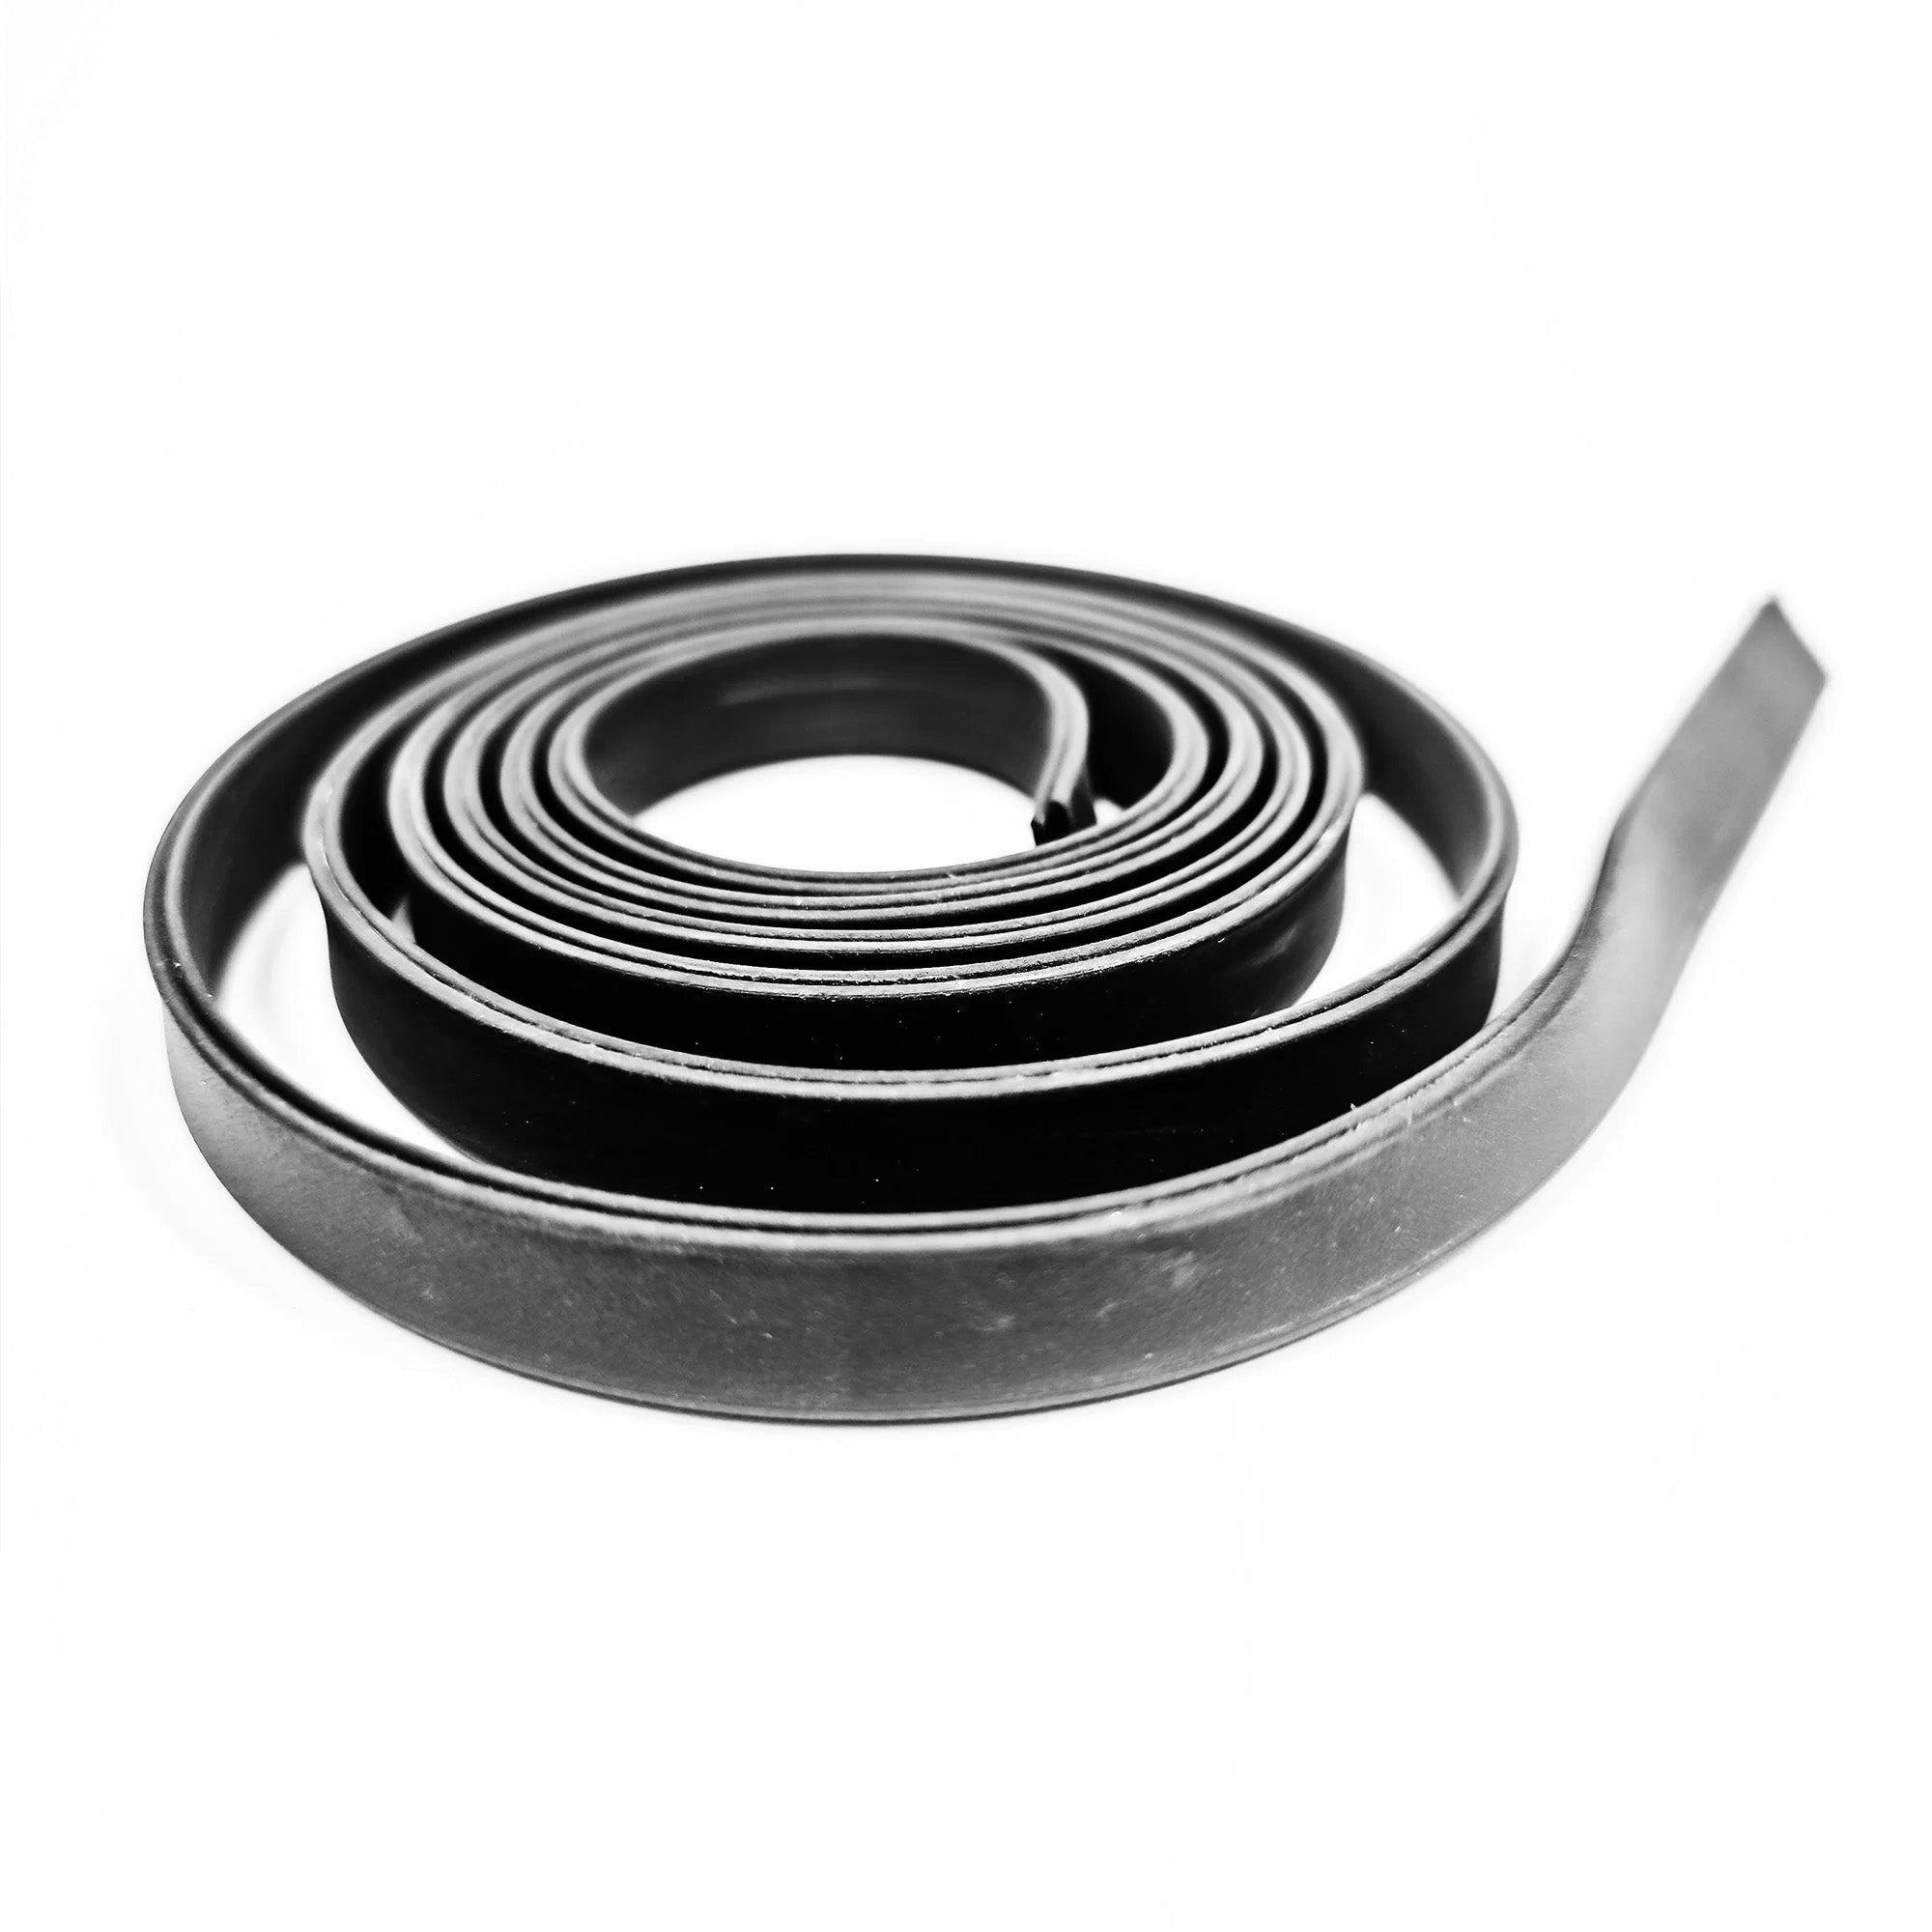 Cyclone Vacuum Deflector Replacement Rubber Gasket